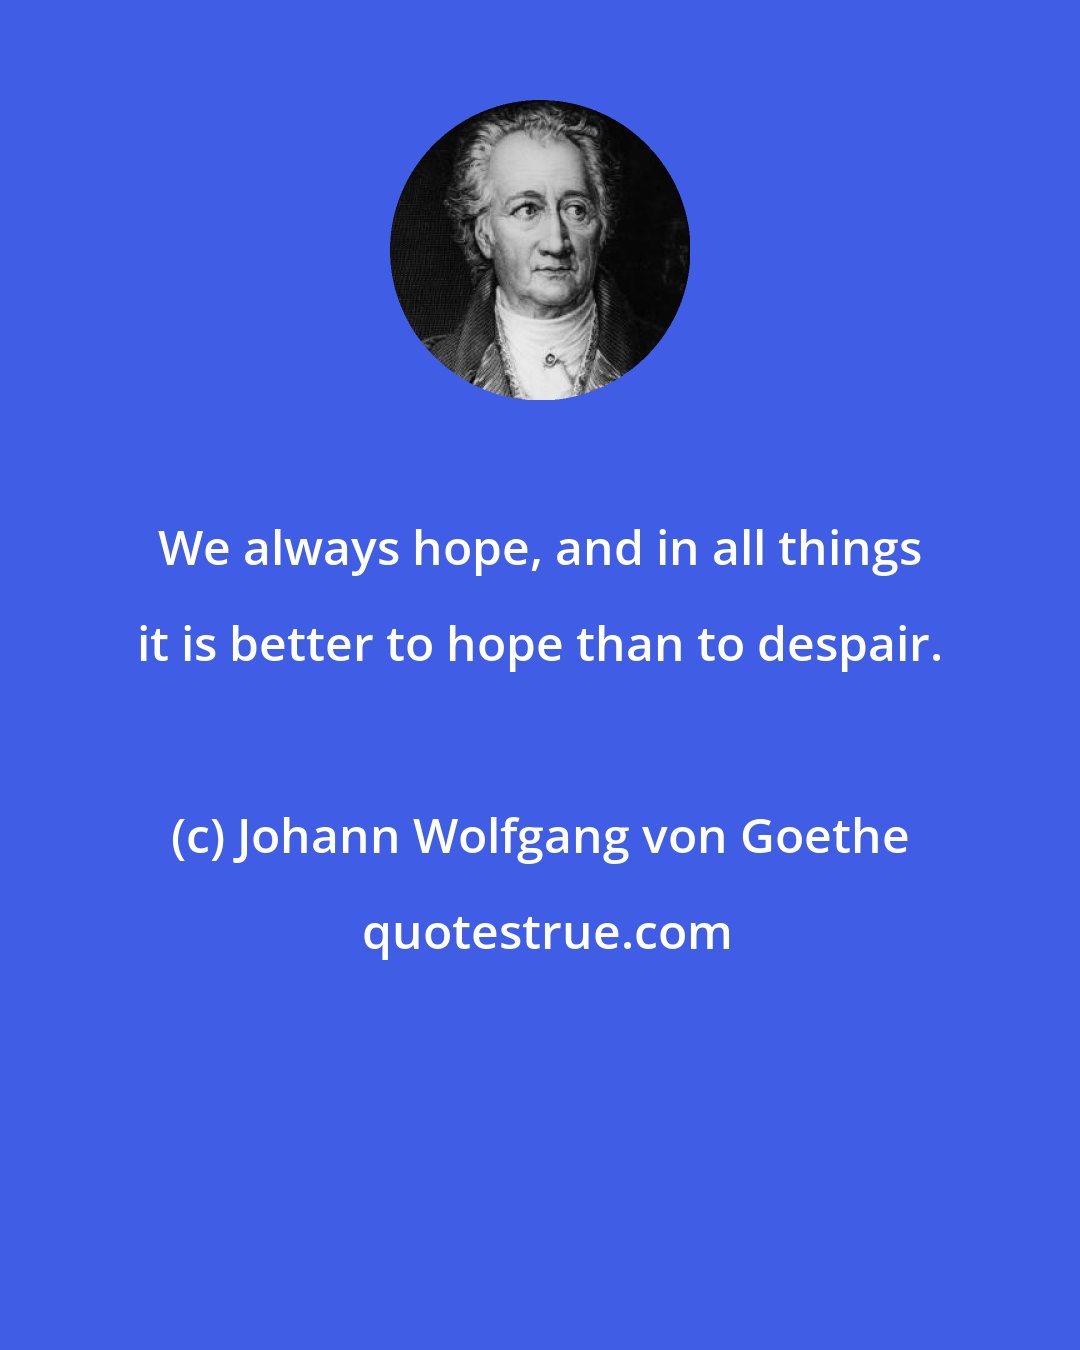 Johann Wolfgang von Goethe: We always hope, and in all things it is better to hope than to despair.